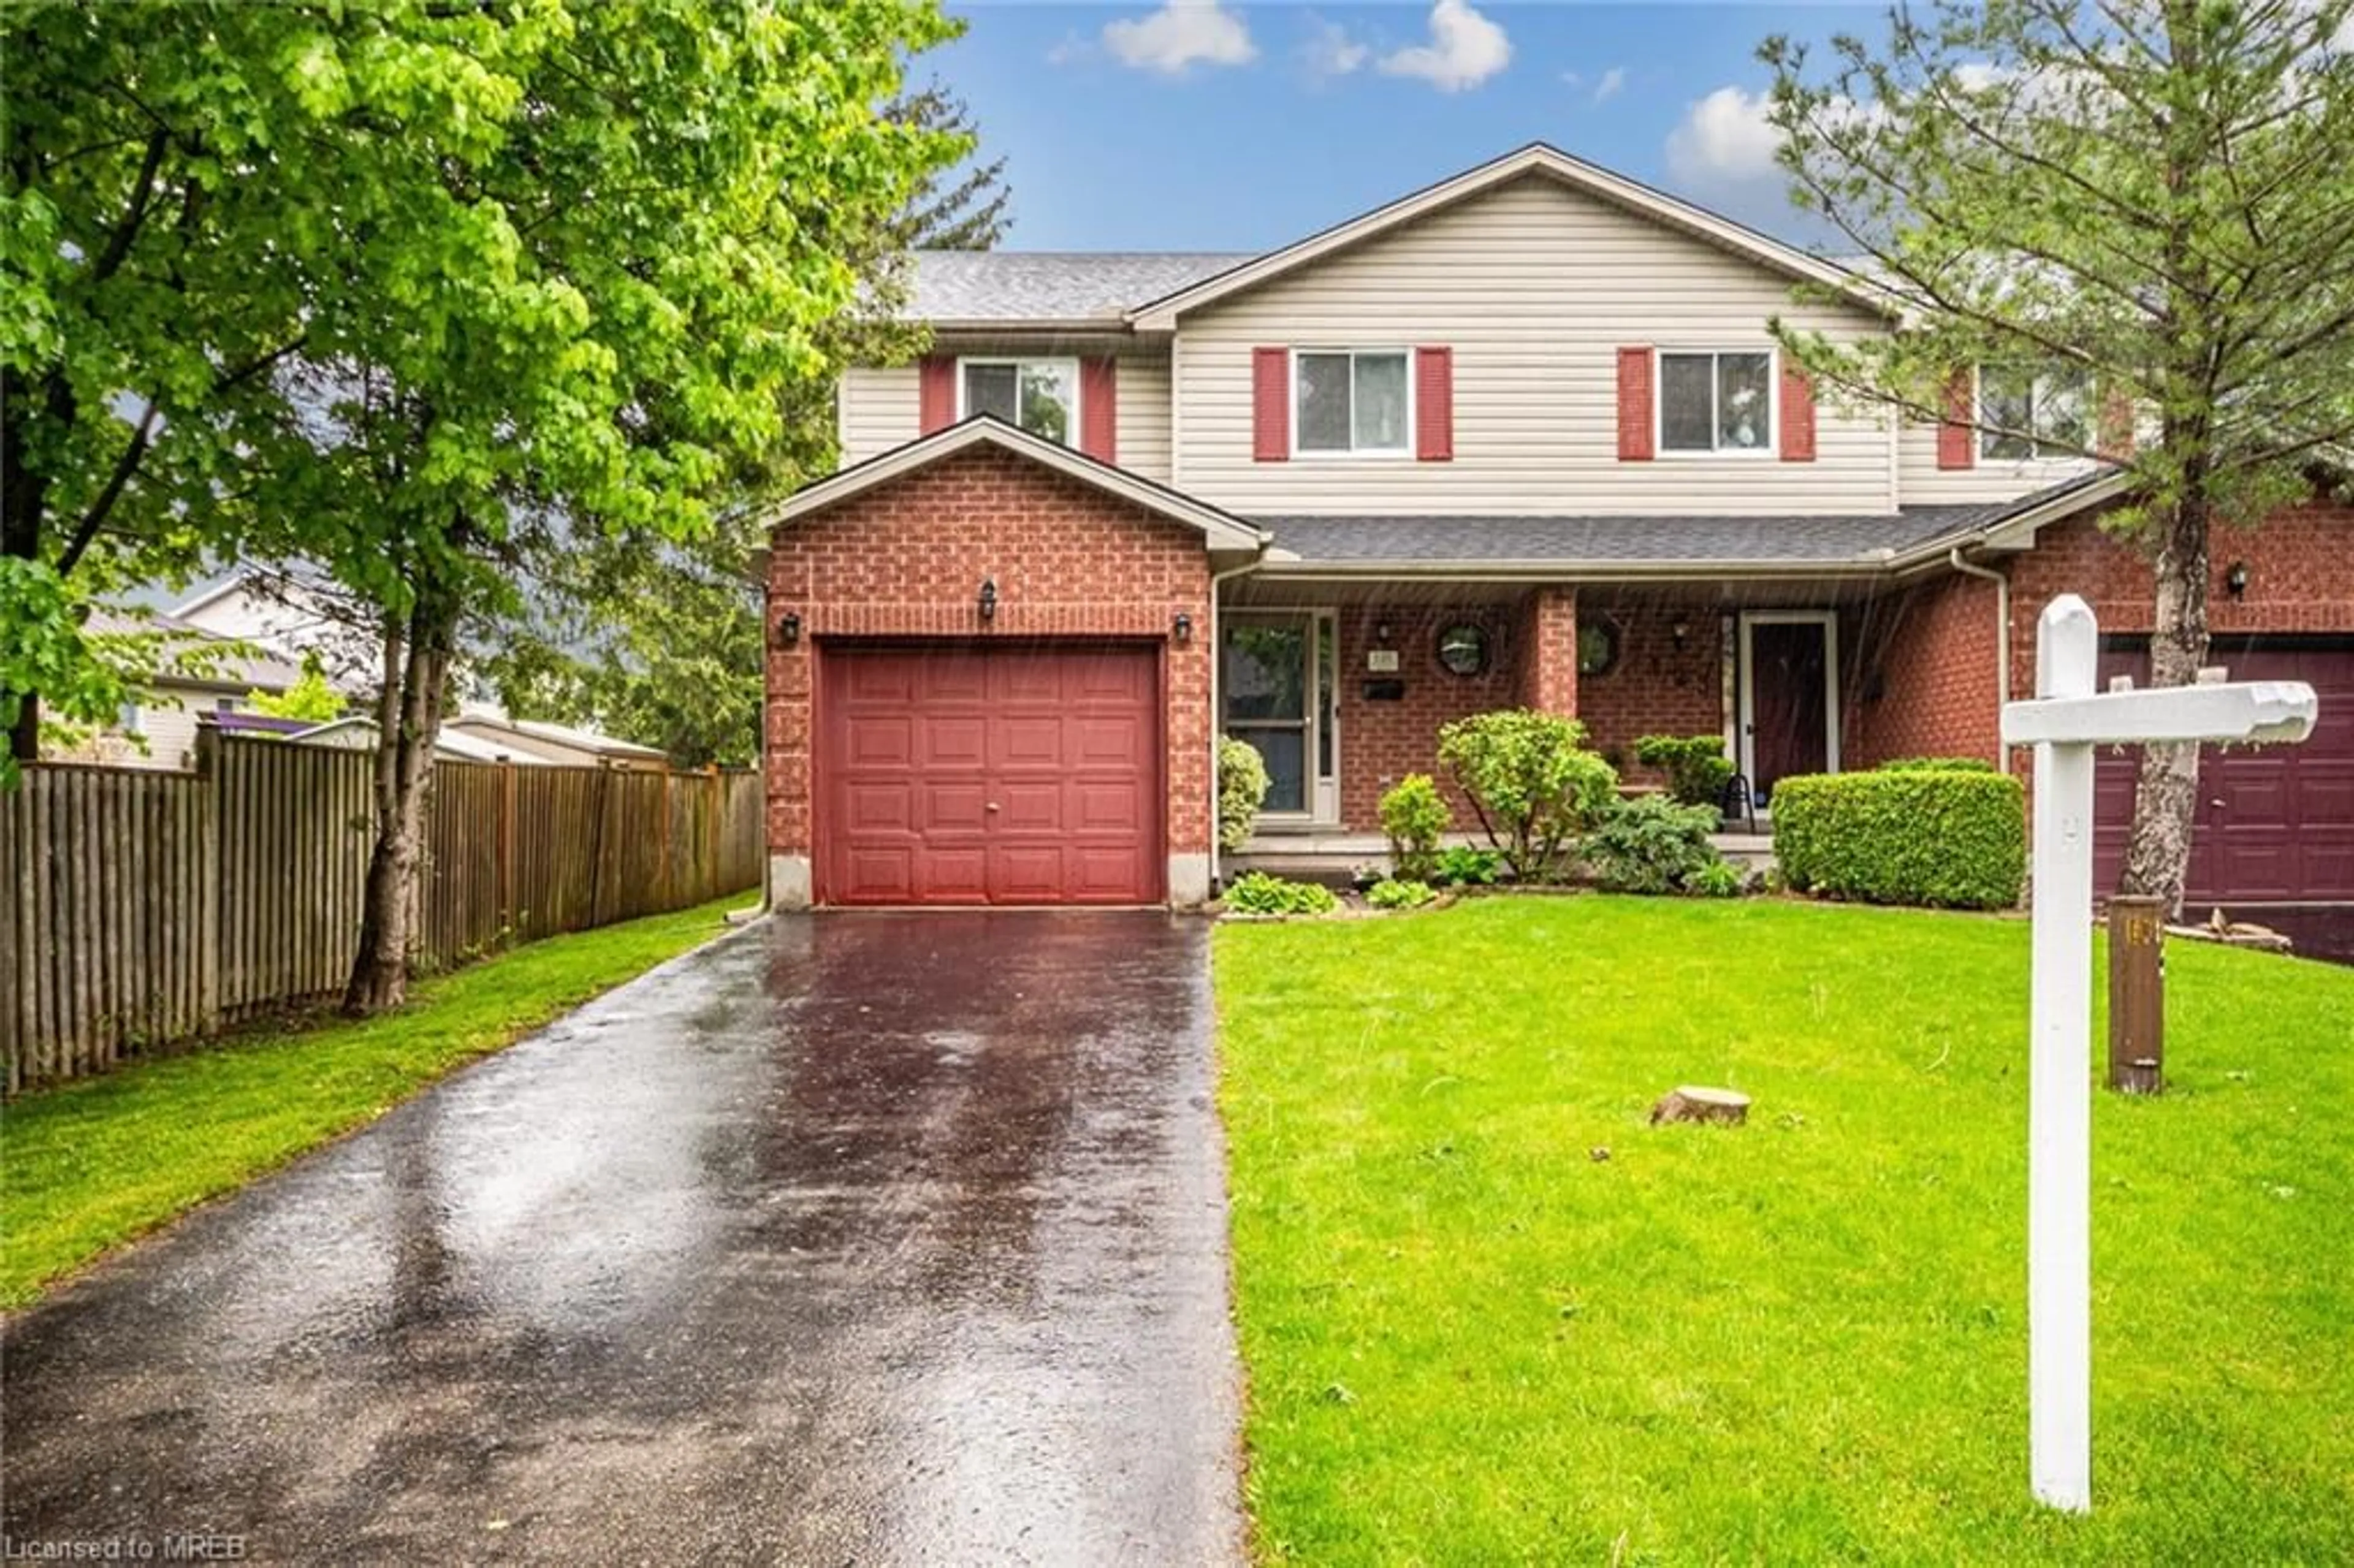 Home with brick exterior material for 125 Killarney Pl, London Ontario N5X 2B5